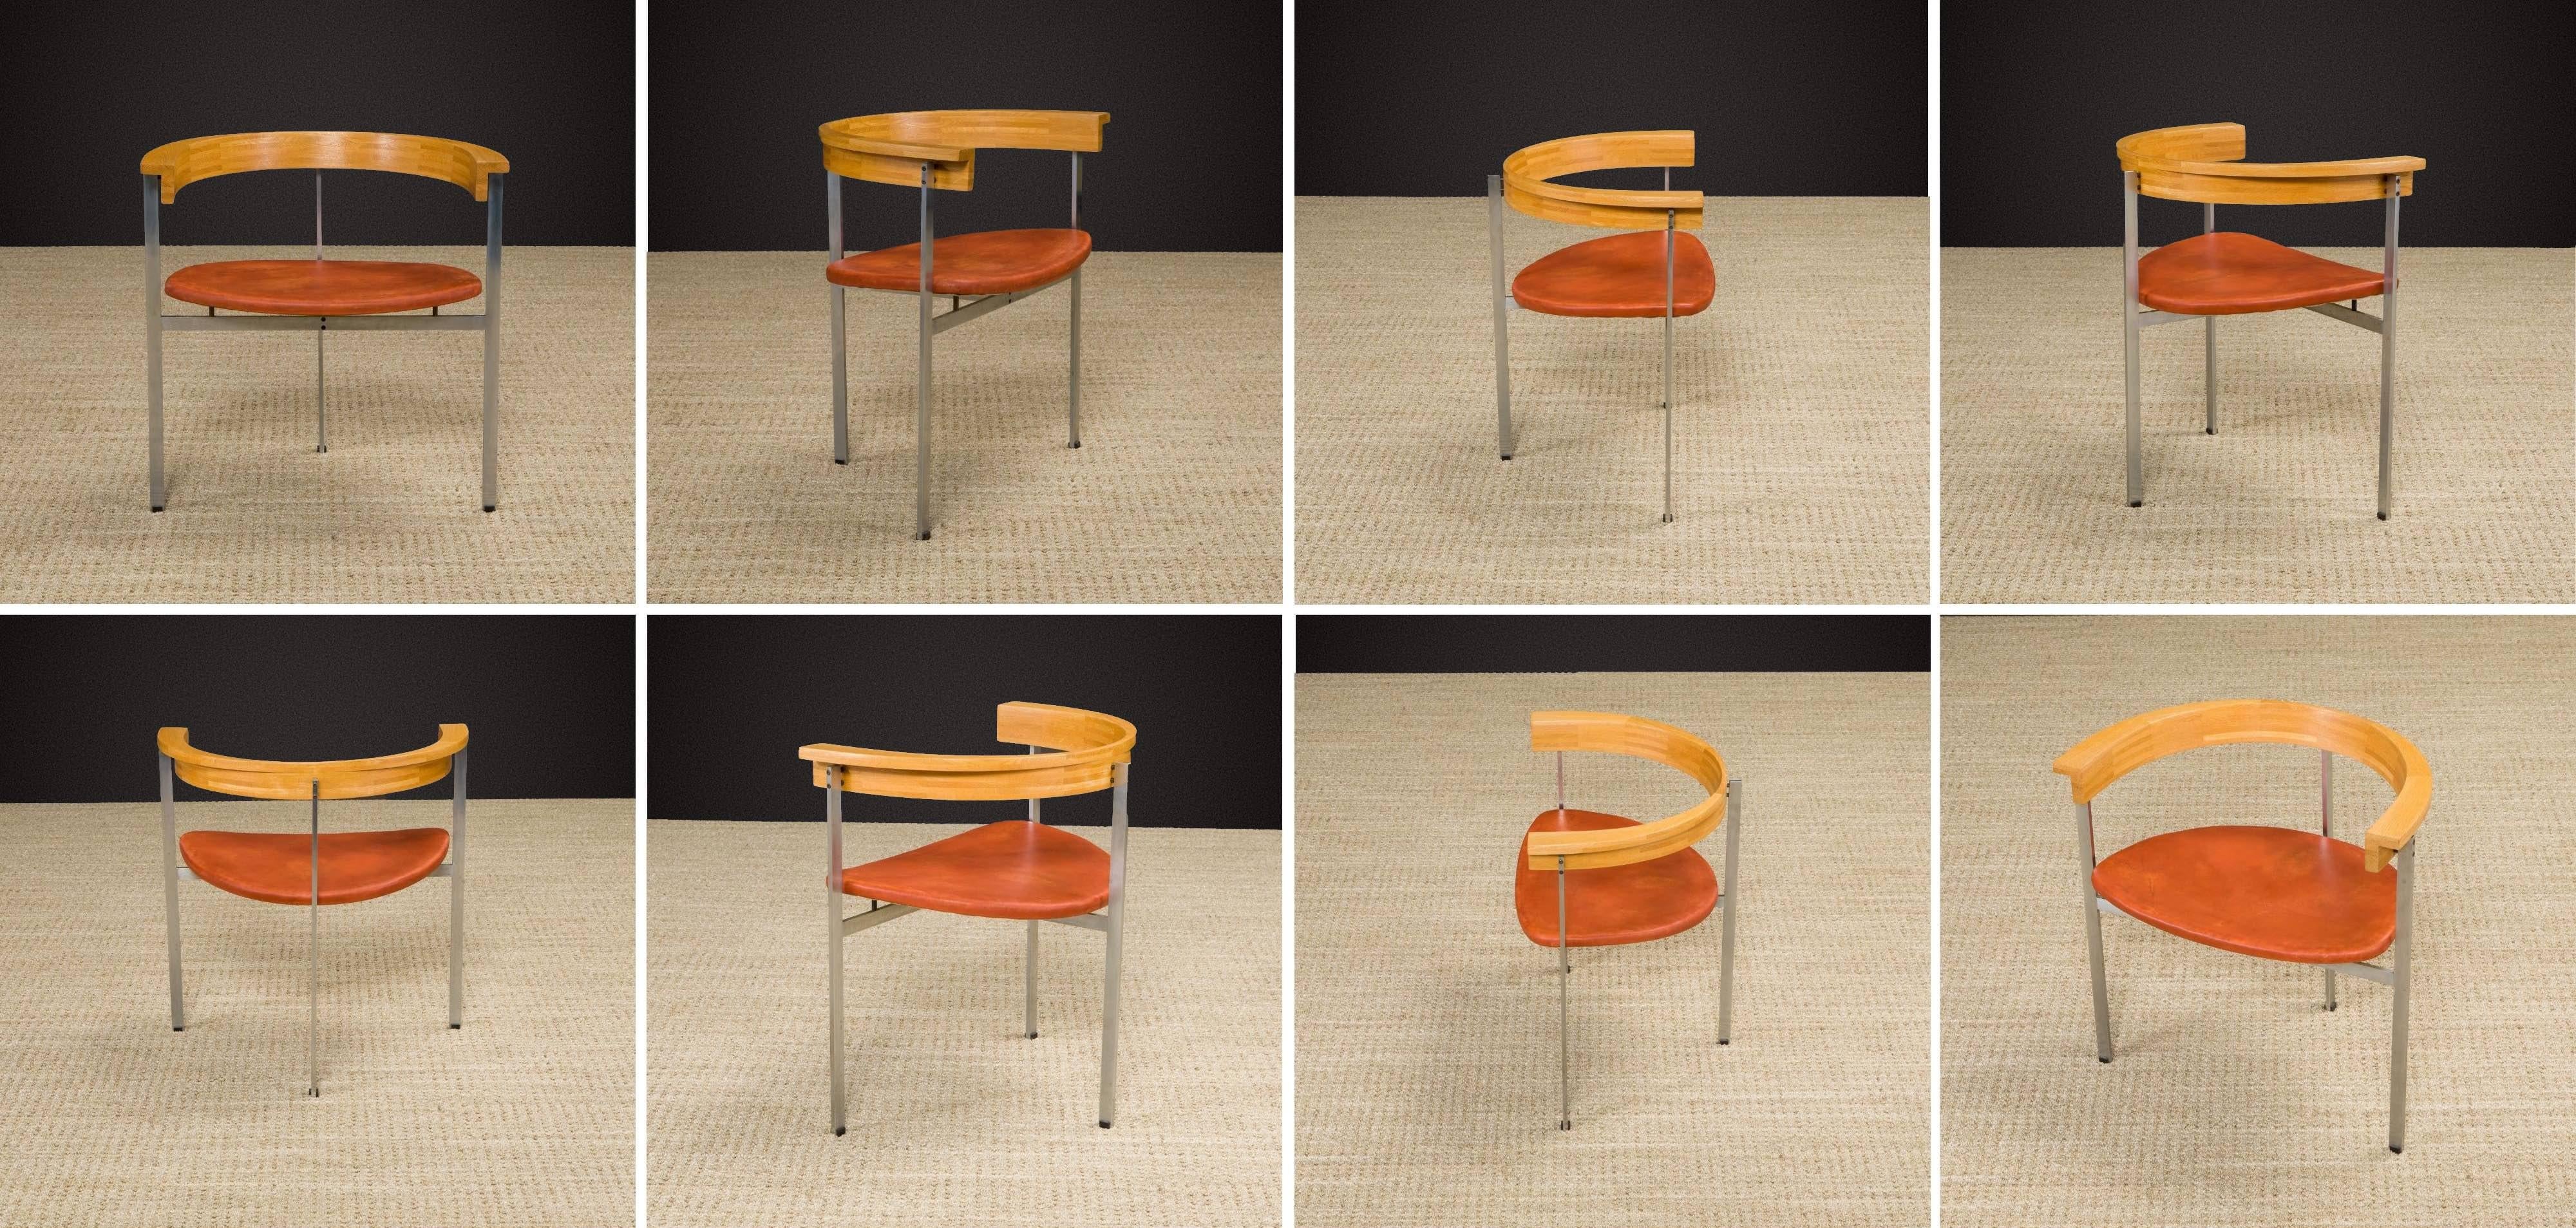 'PK-11' Armchairs by Poul Kjærholm for EKC, Set of Six, Denmark c. 1957, Signed For Sale 5